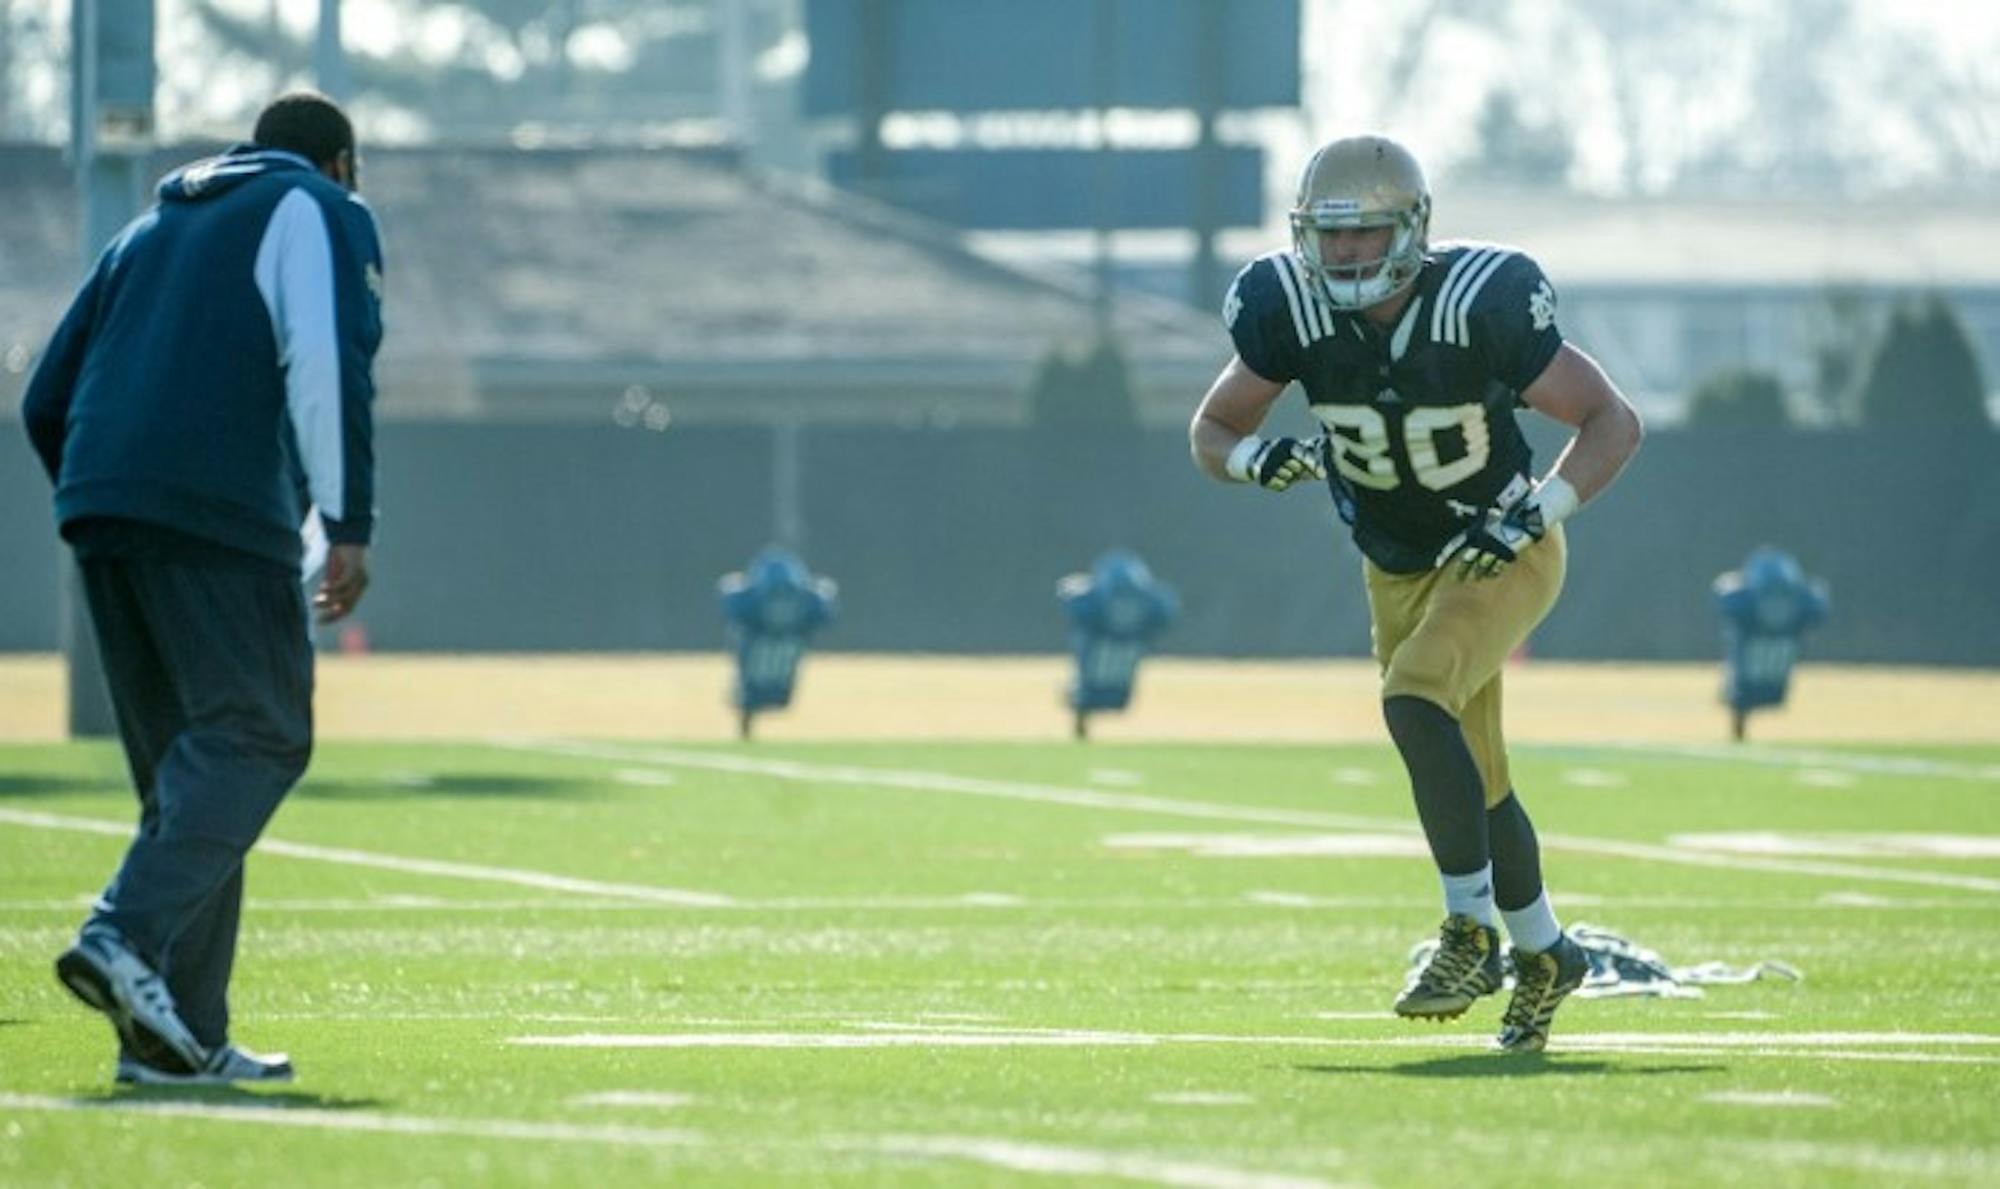 Irish junior tight end Durham Smythe runs a route April 8 at LaBar Practice Complex. Smythe only tallied one reception for seven yards in 2014 but is eyeing the starting tight end spot for the 2015 season.